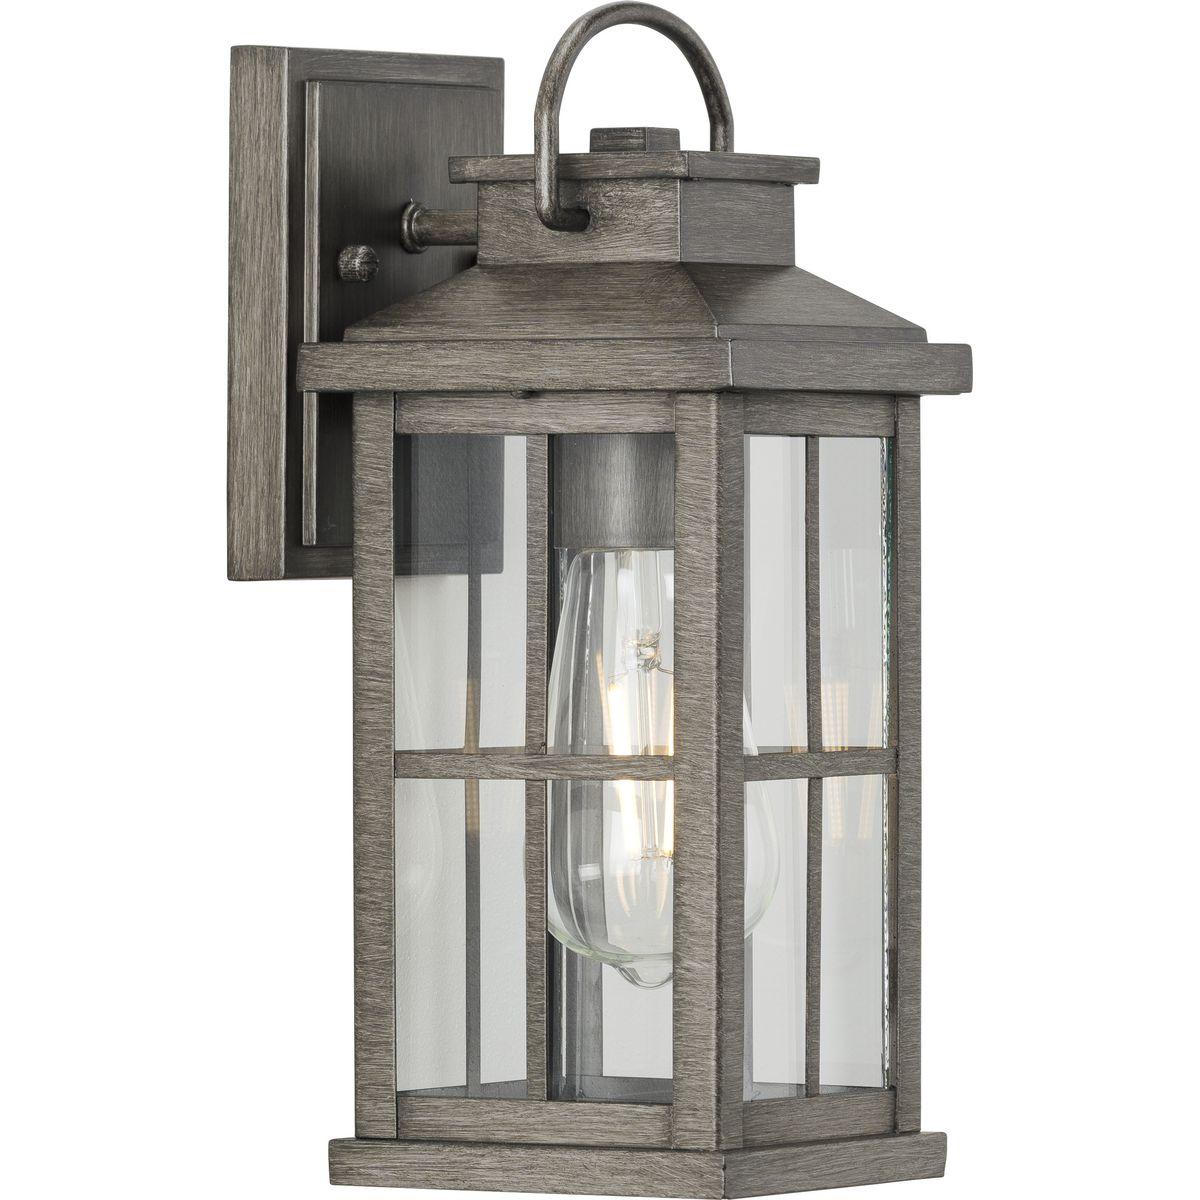 Hubbell P560264-103 Cultivate a timeless aesthetic with the Williamston Collection 1-Light Clear Glass Antique Pewter Farmhouse Outdoor Small Wall Lantern Light. A light source glows from within clear glass panes beneath a traditional windowpane design for classic character.